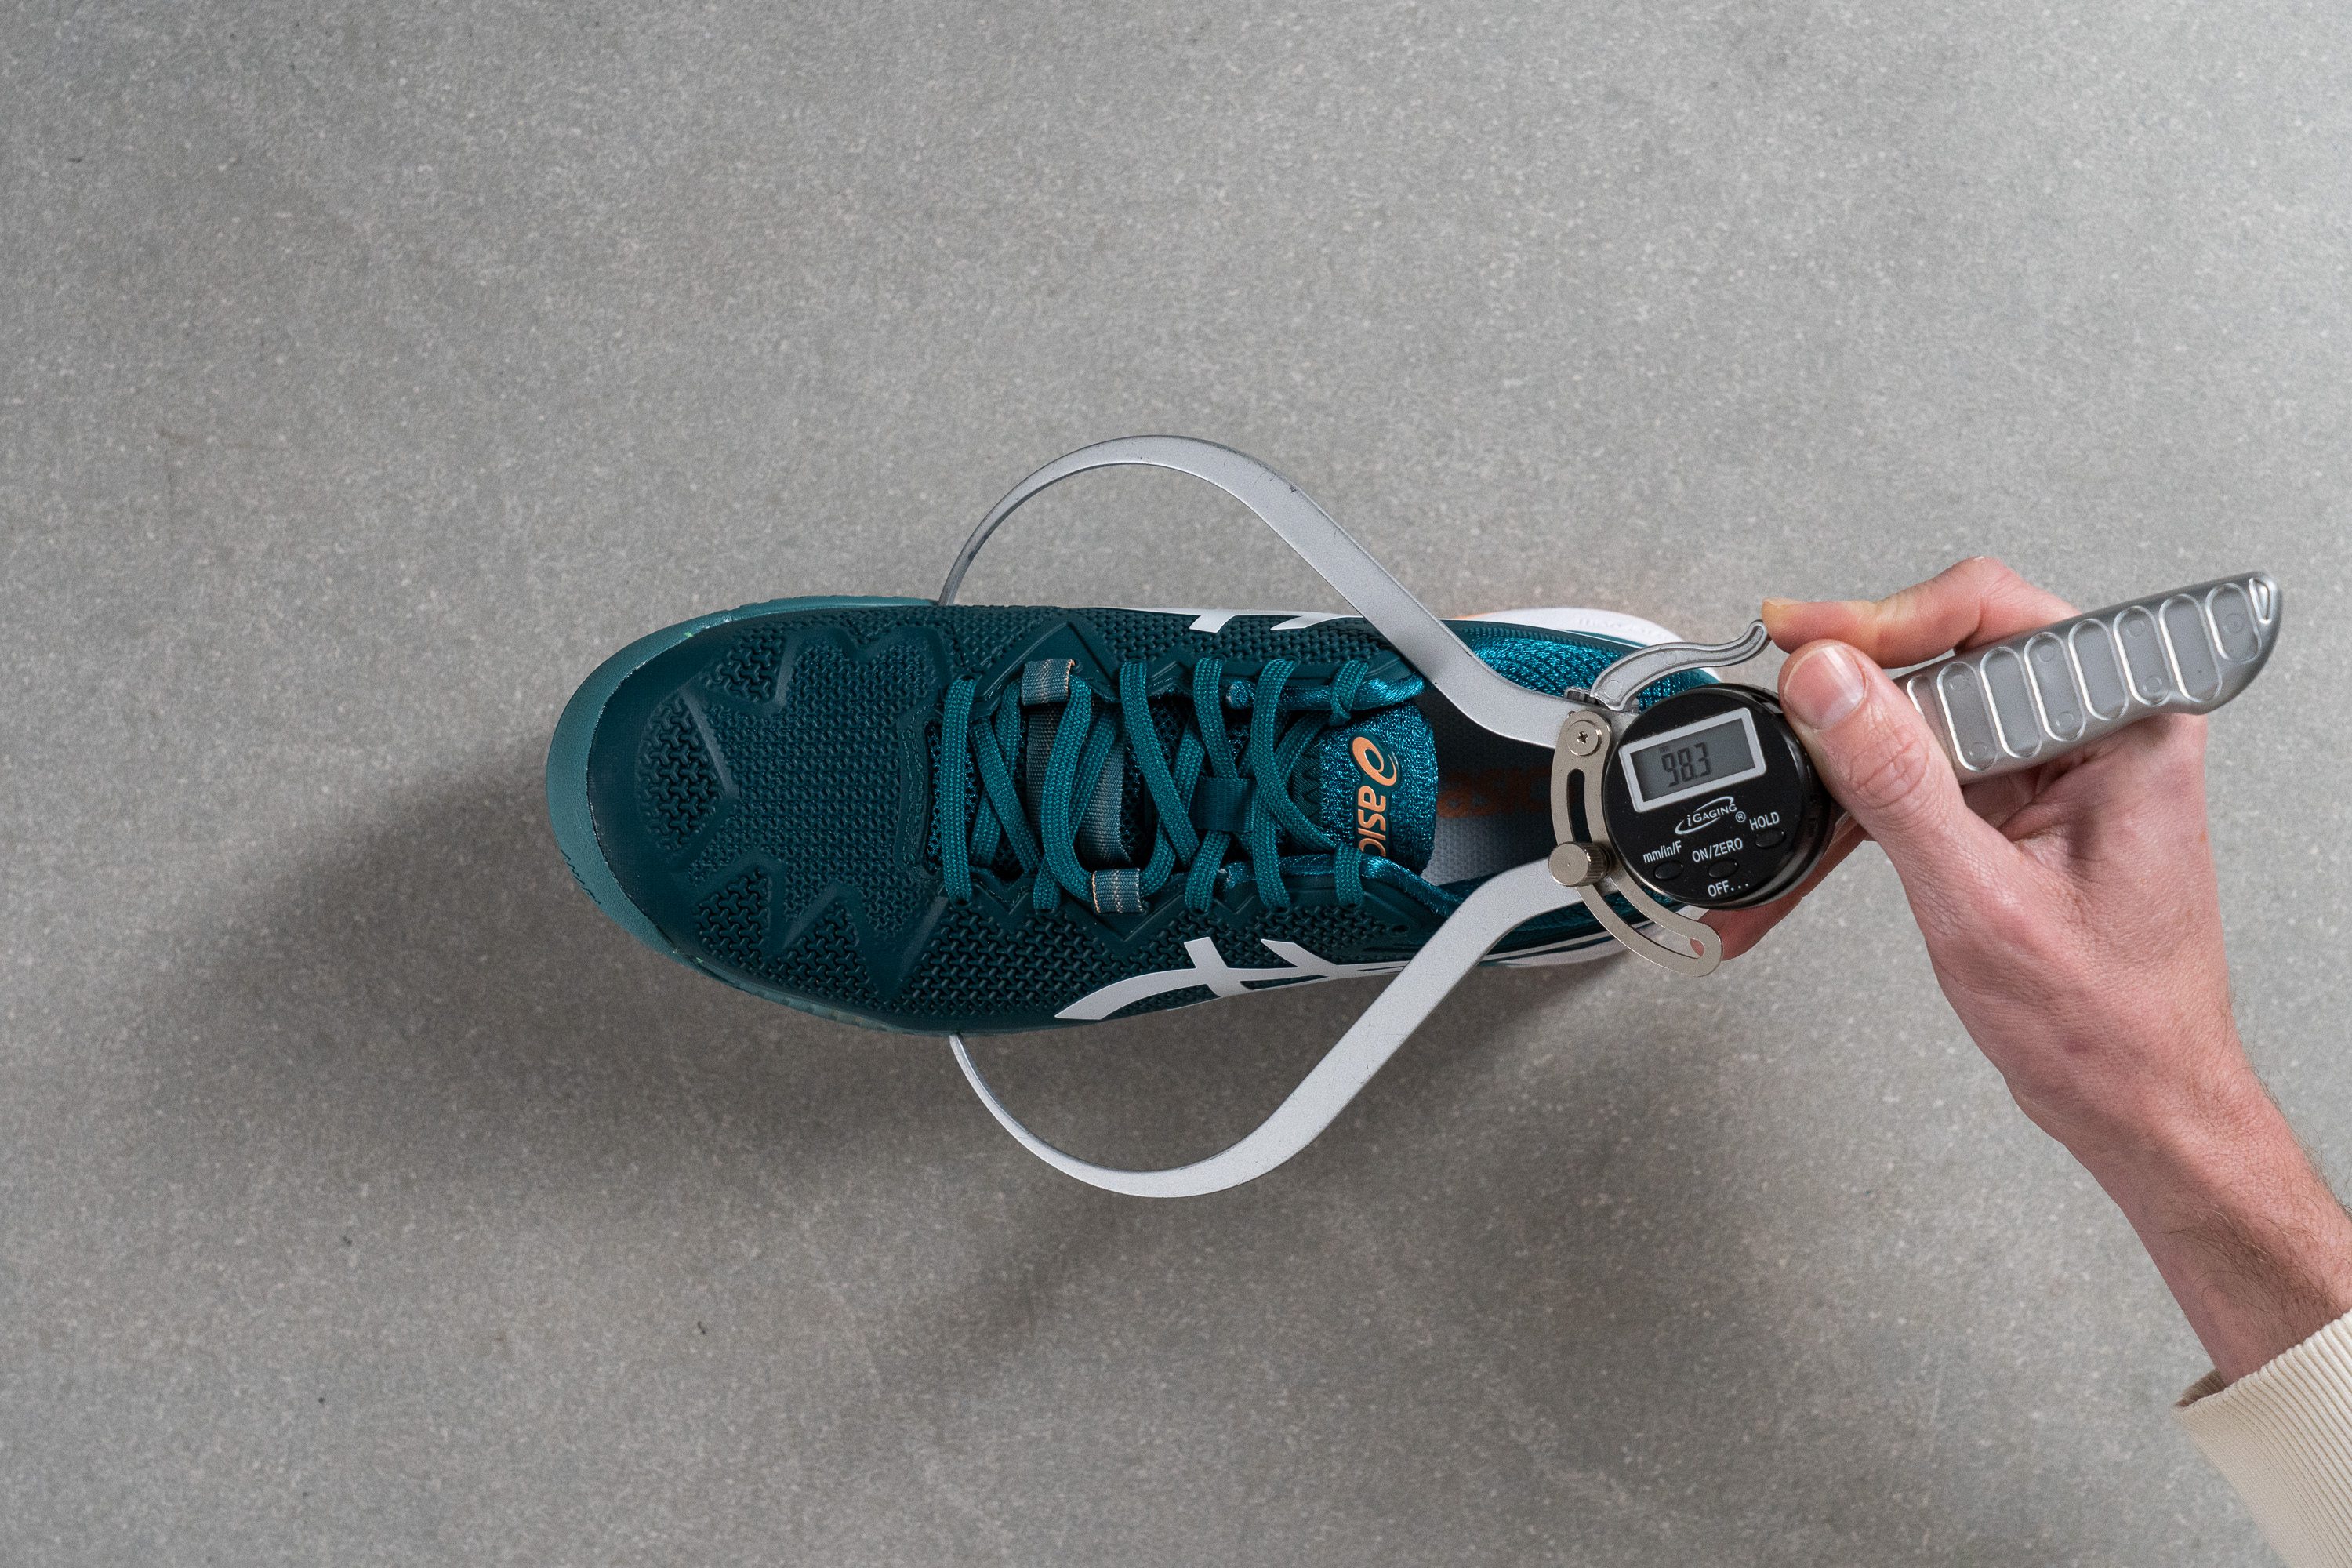 ASICS Gel Resolution 8 Toebox width at the widest part